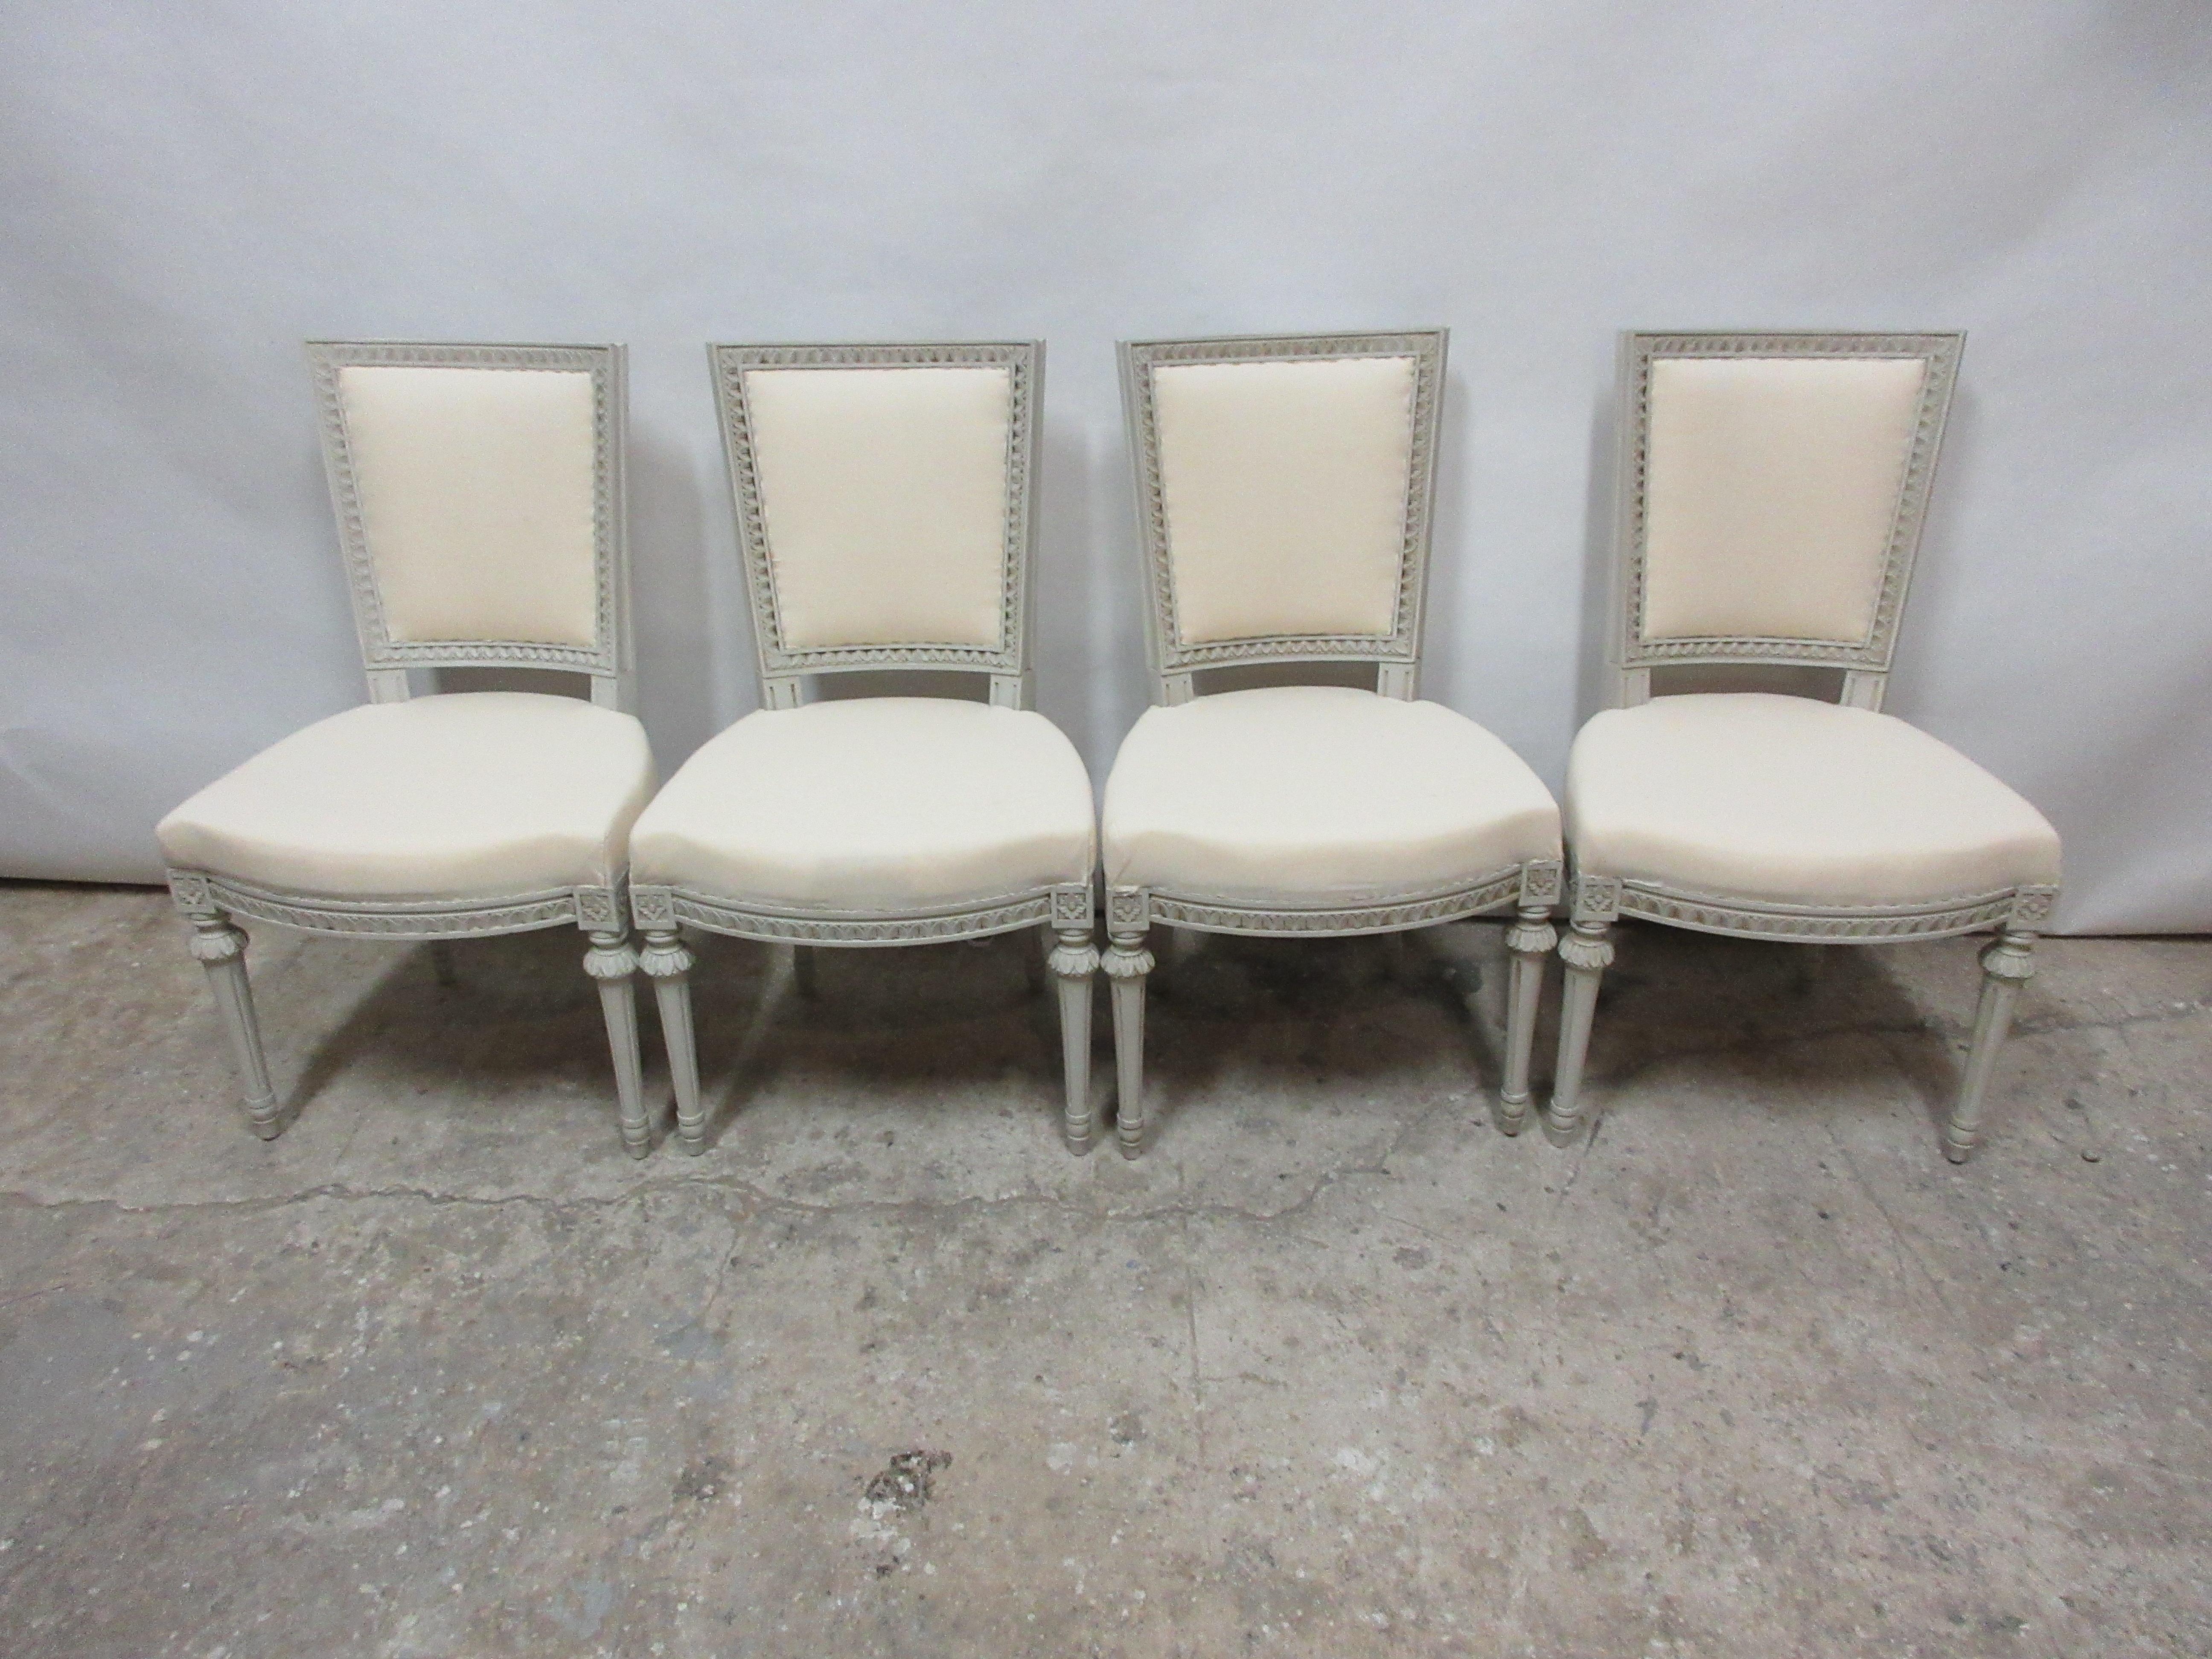 This is a set of 4 Swedish Gustavian side chairs, they have been restored and repainted with milk paints 